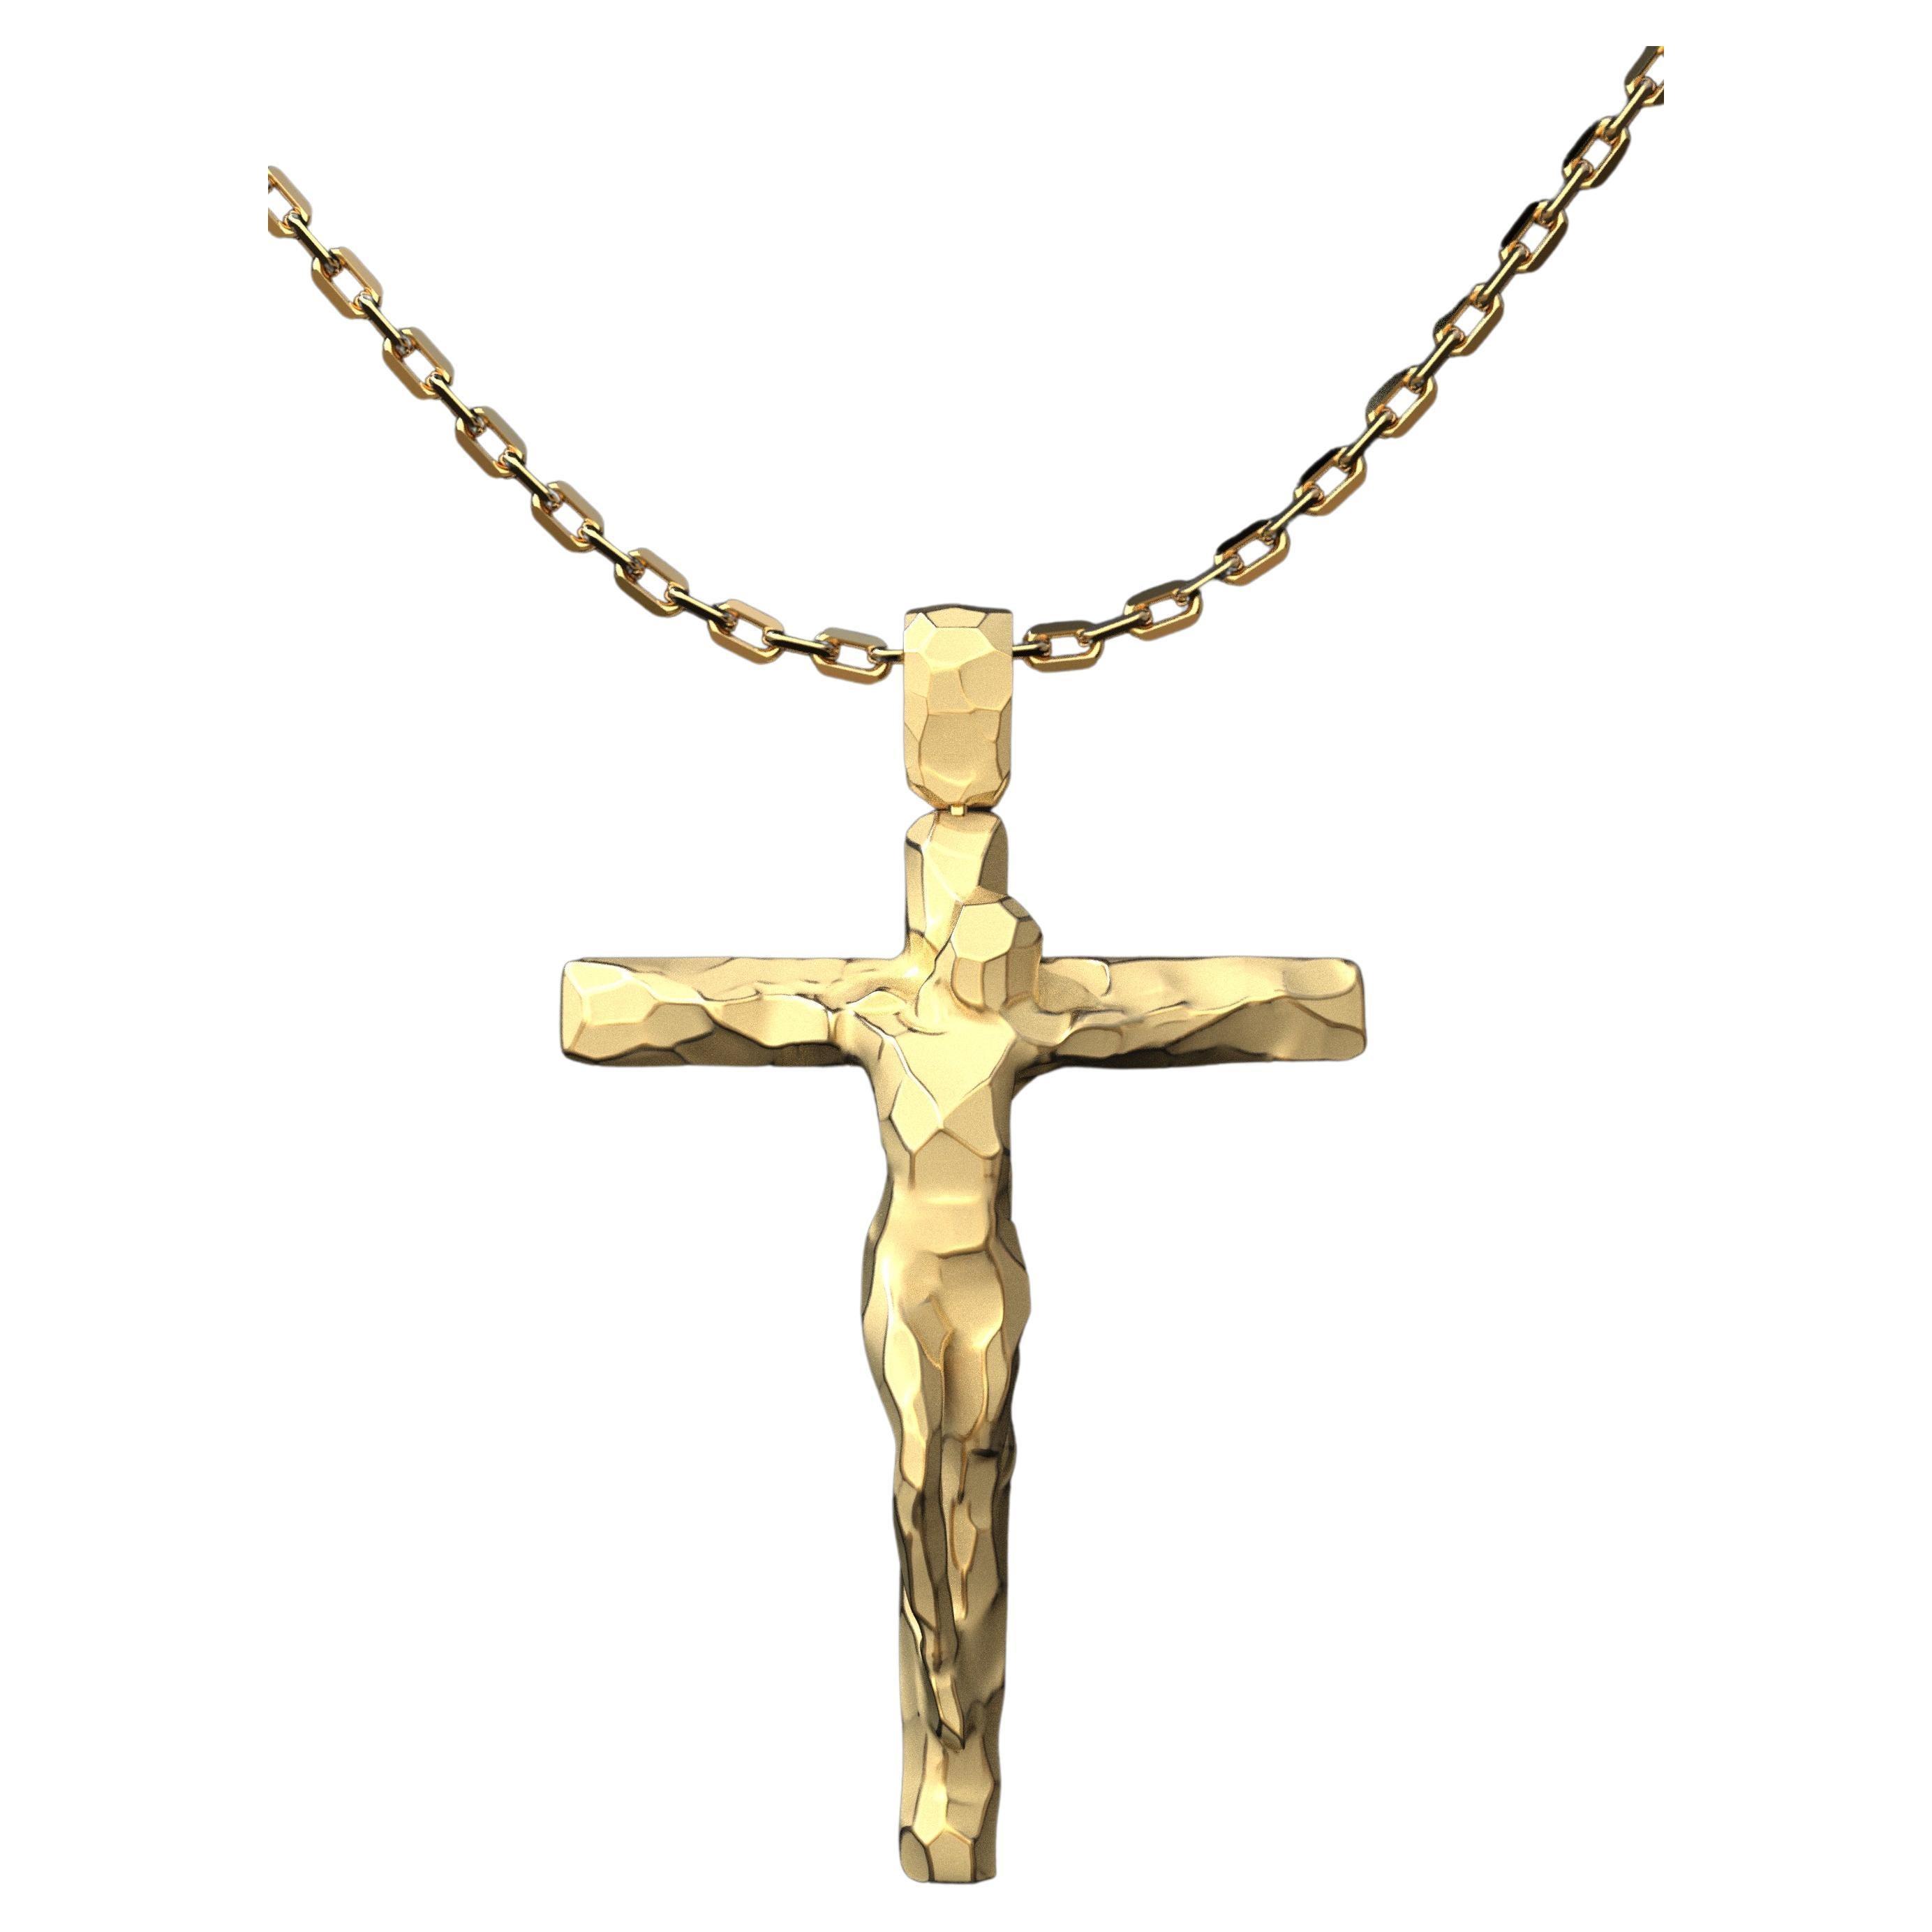 Buy 14k Gold Crucifix Online In India - Etsy India